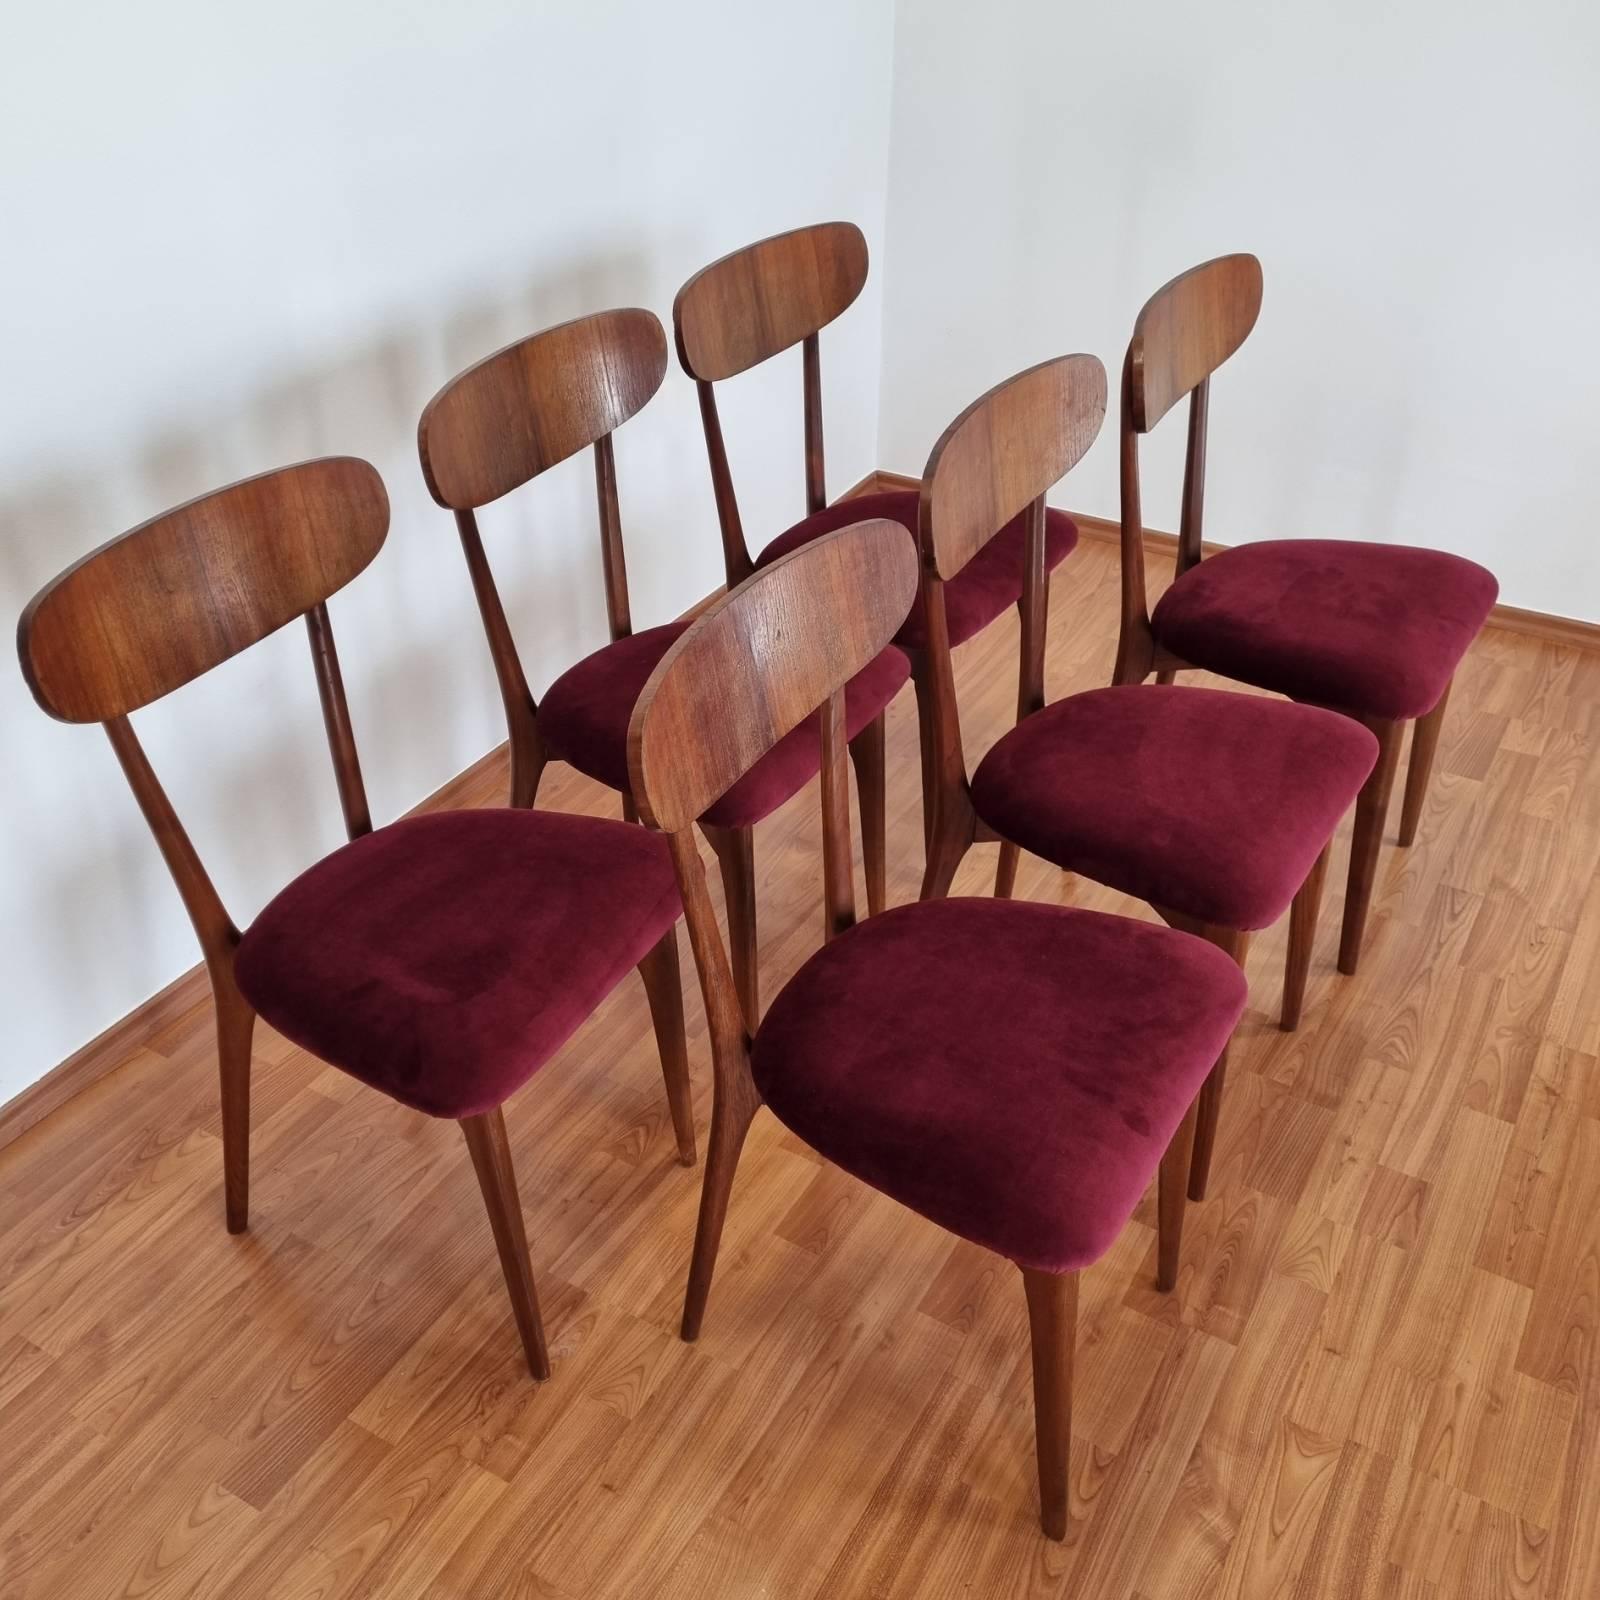 Set of 6 Italian dining chairs in style of Ico Parisi.
Made of beech wood and velvet.
In good vintage condition with minor signs of wear here and there.

The upholstery was recently changed.